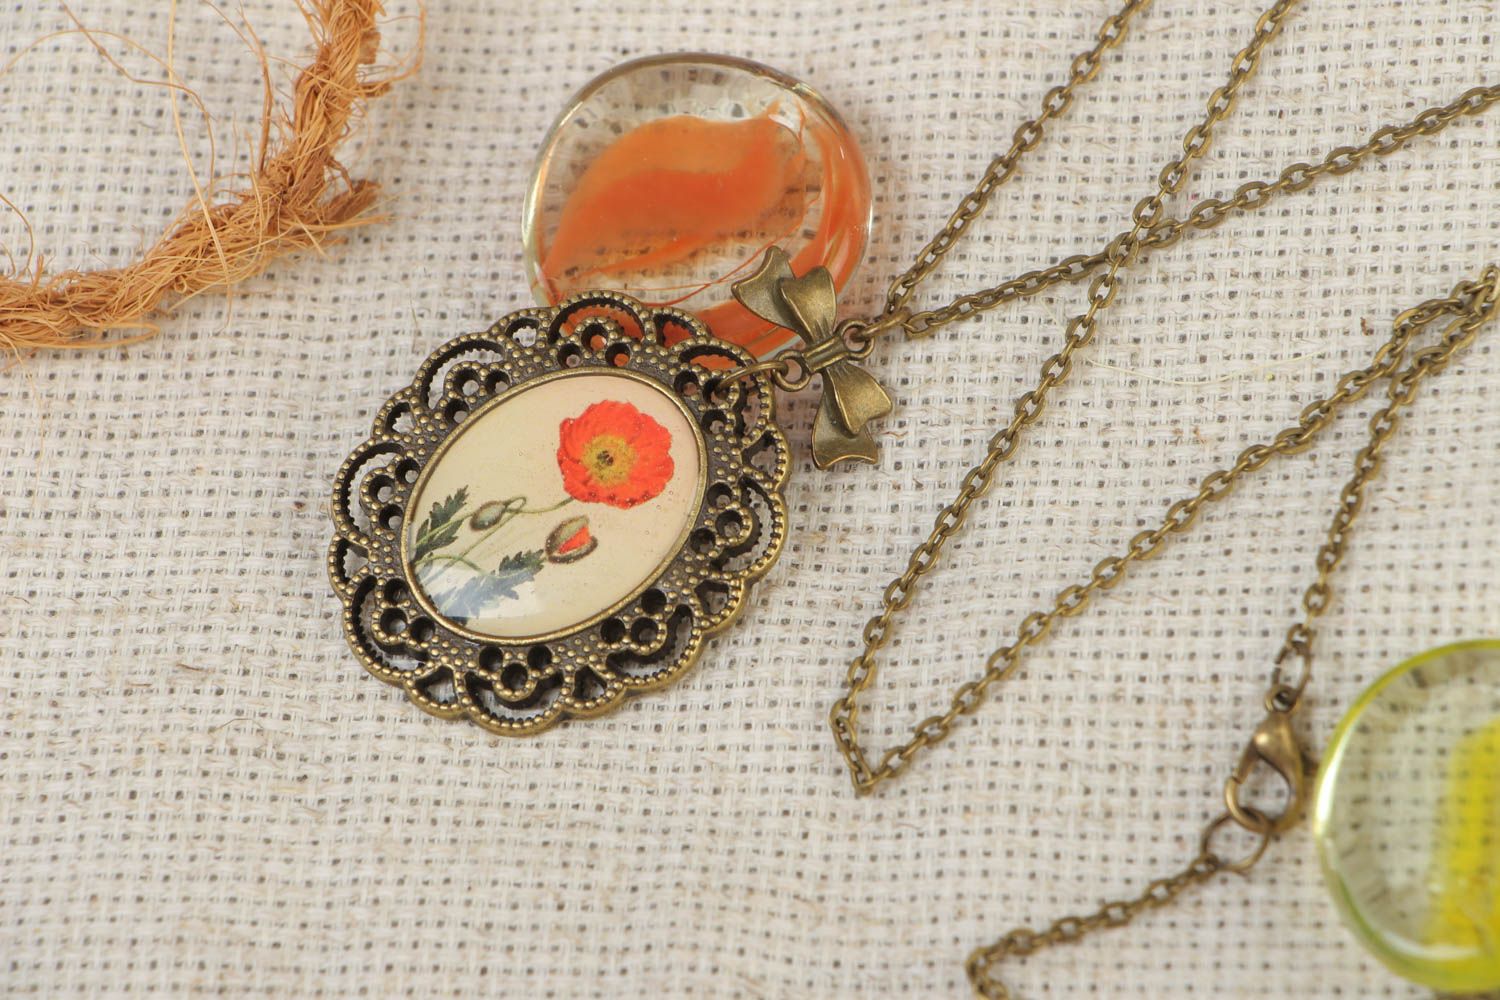 Handmade metal pendant necklace with flower image coated with glass glaze on chain photo 1